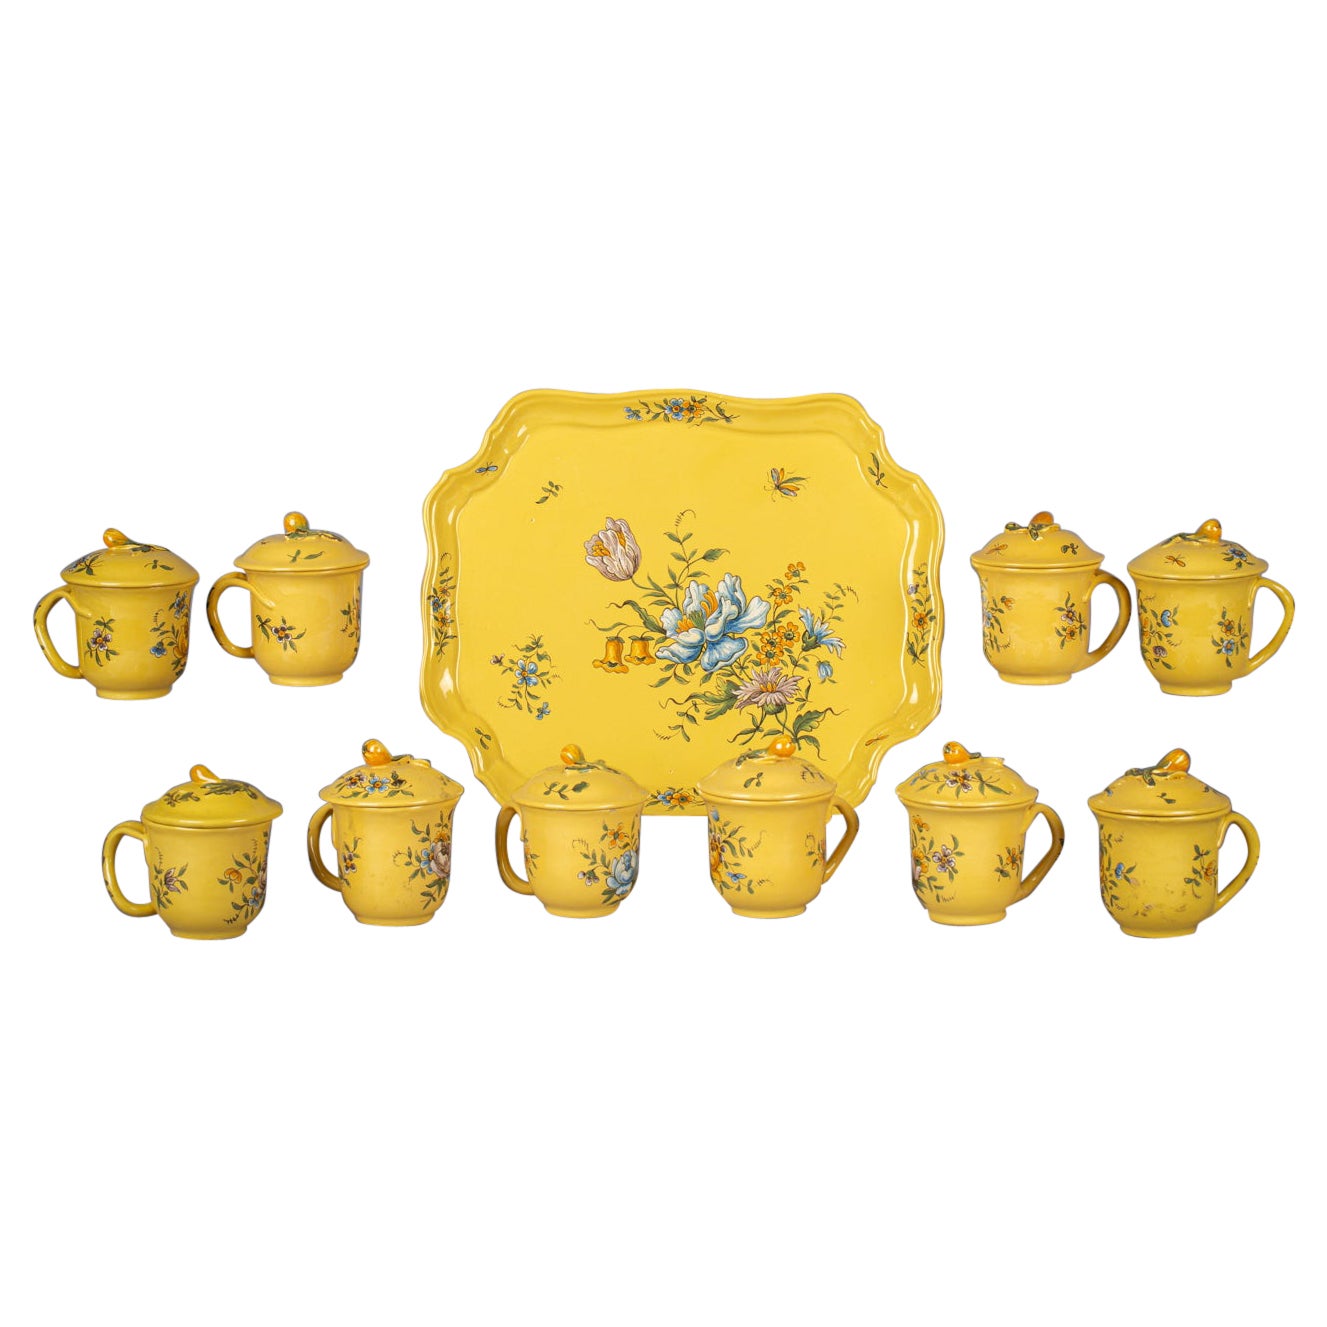 French Faience Yellow Ground Pot-de-creme Set with Platter, circa 1890 For Sale